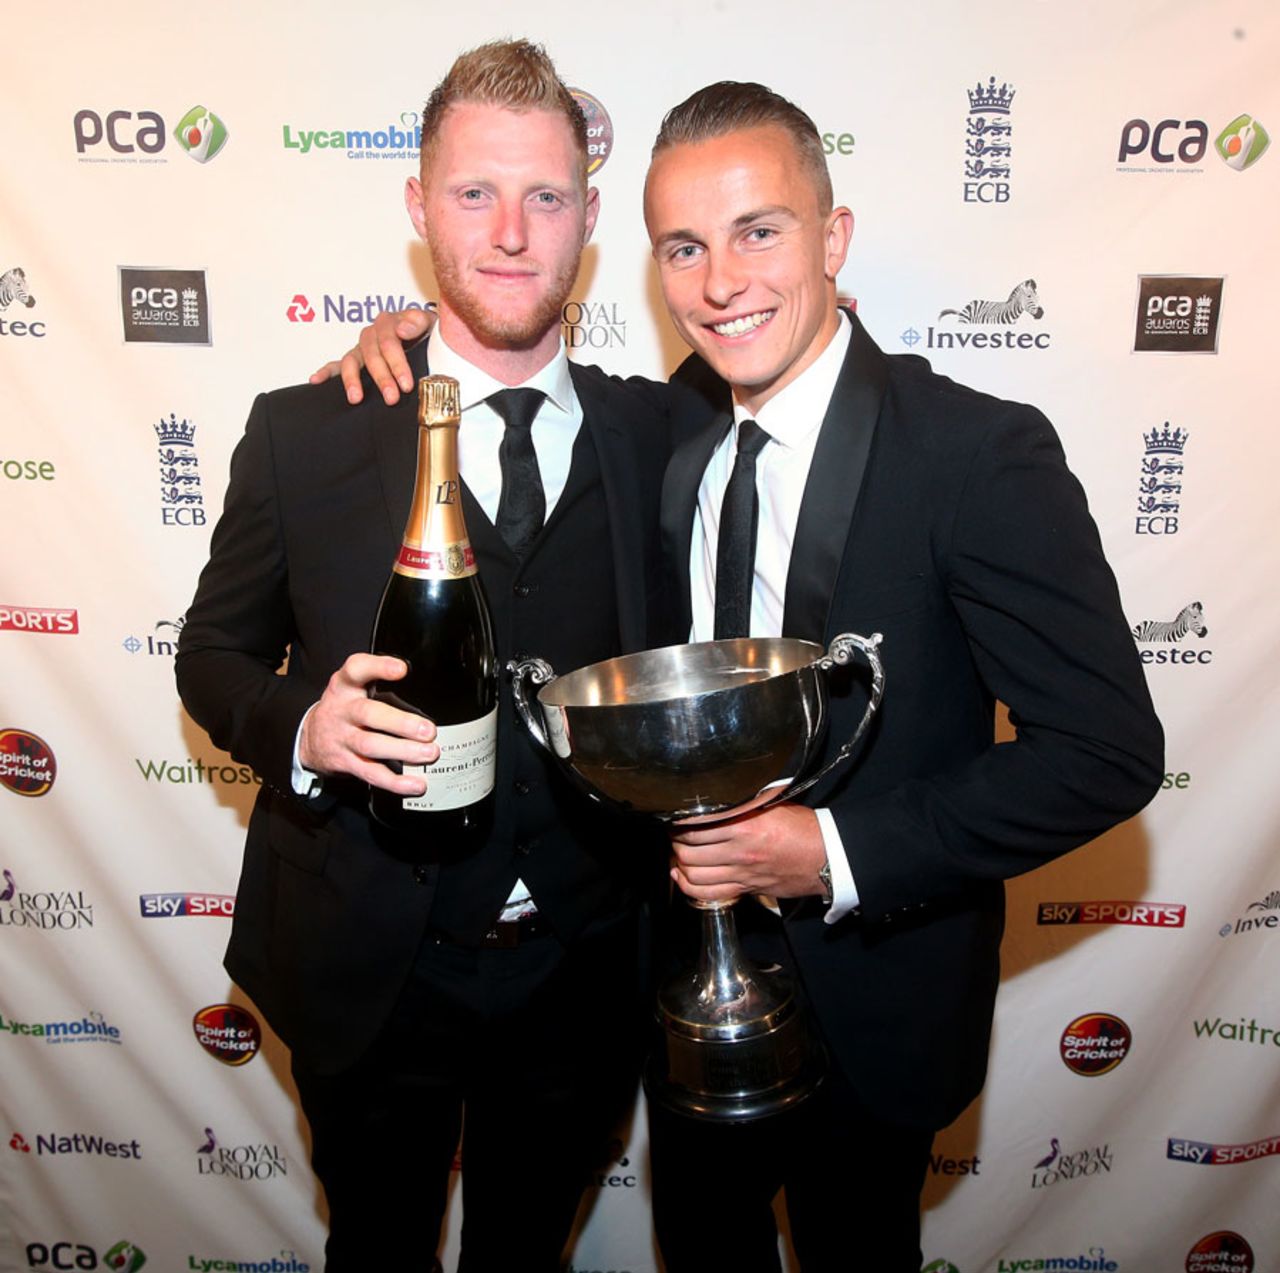 Surrey's Tom Curran after receiving the John Arlott Cup for the PCA Young Player of the Year from Ben Stokes, London, September 29, 2015